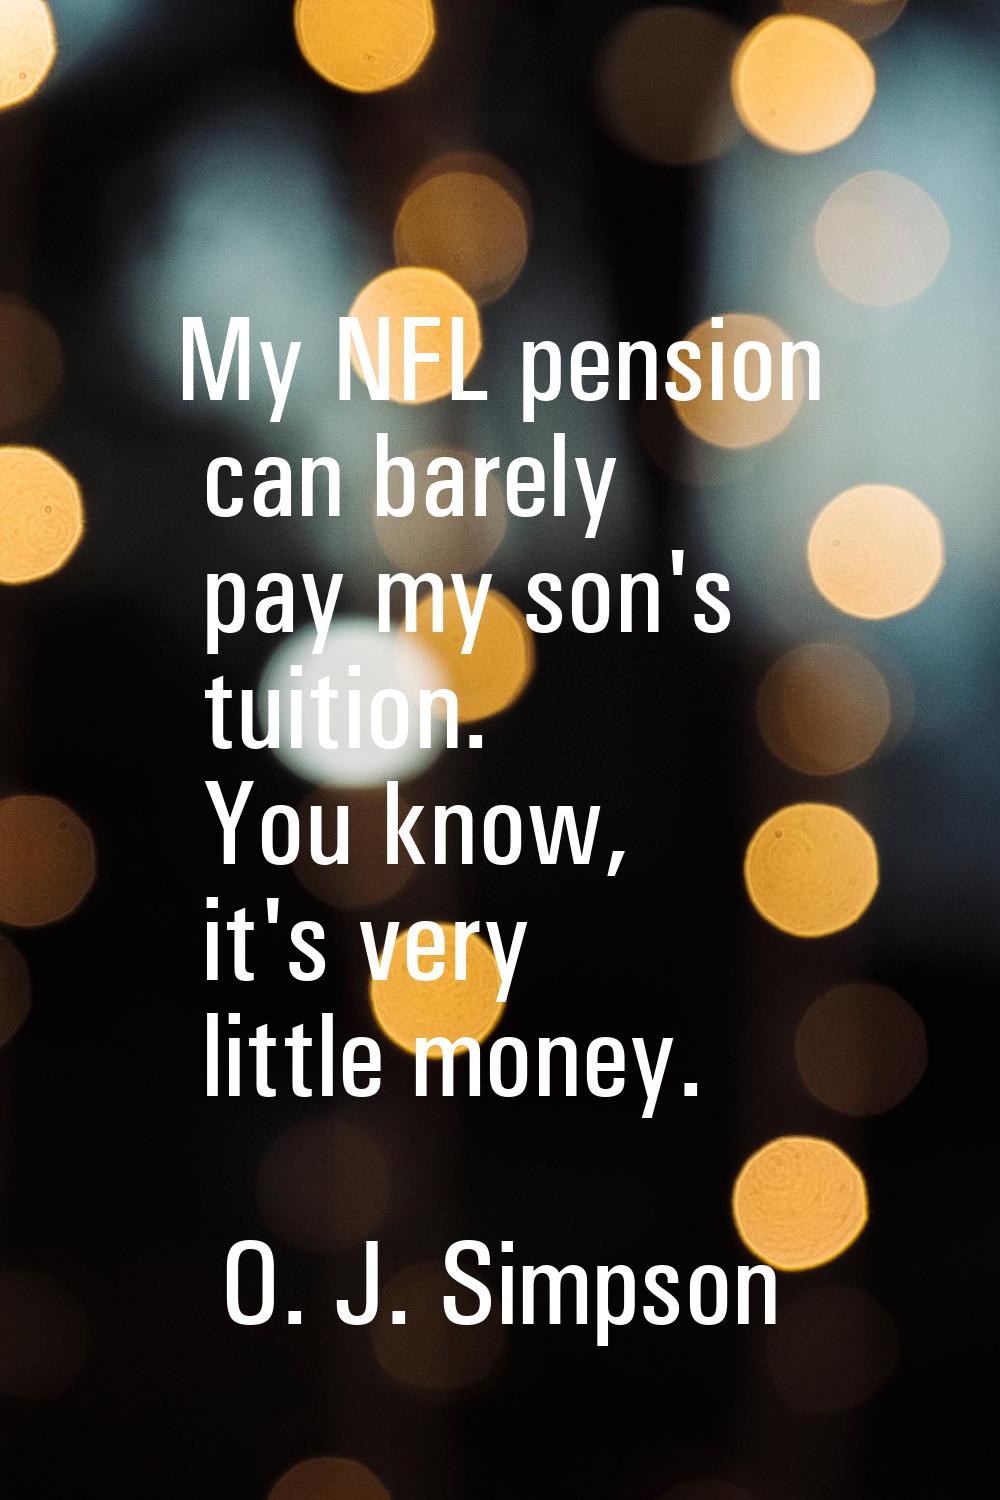 My NFL pension can barely pay my son's tuition. You know, it's very little money.